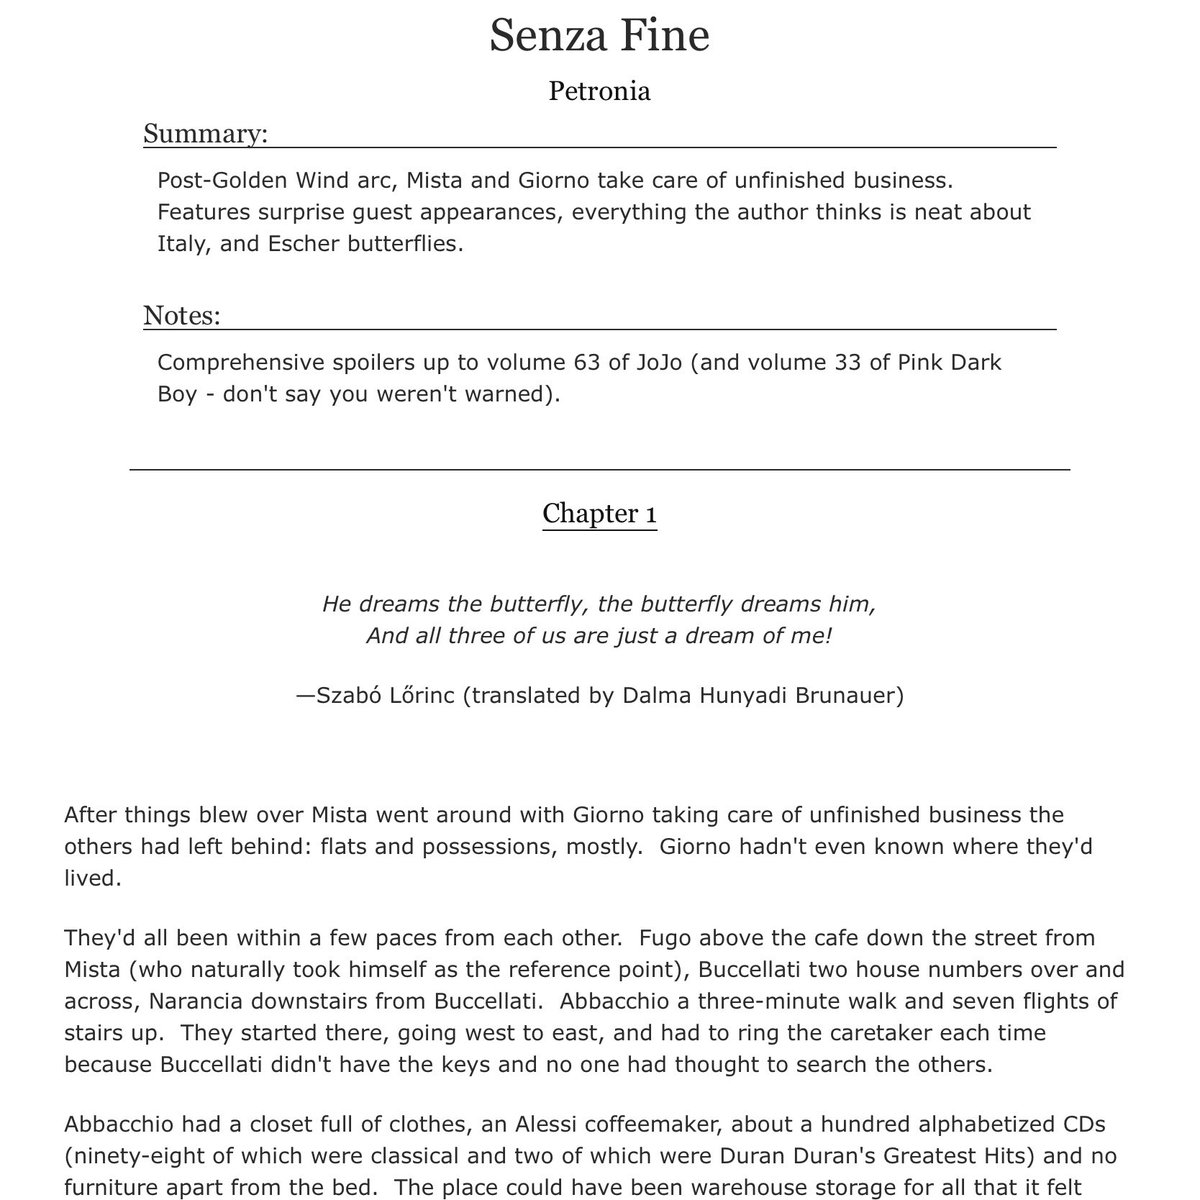 Senza Fine by Petronia is hands down one of my favorite fics. It is brief but packs a punch and, for me, is one of my favorite interpretations of the events post VA. Death, loss, anger, grief; all there. But also a story of new beginnings as the ones who survived try to move on. 